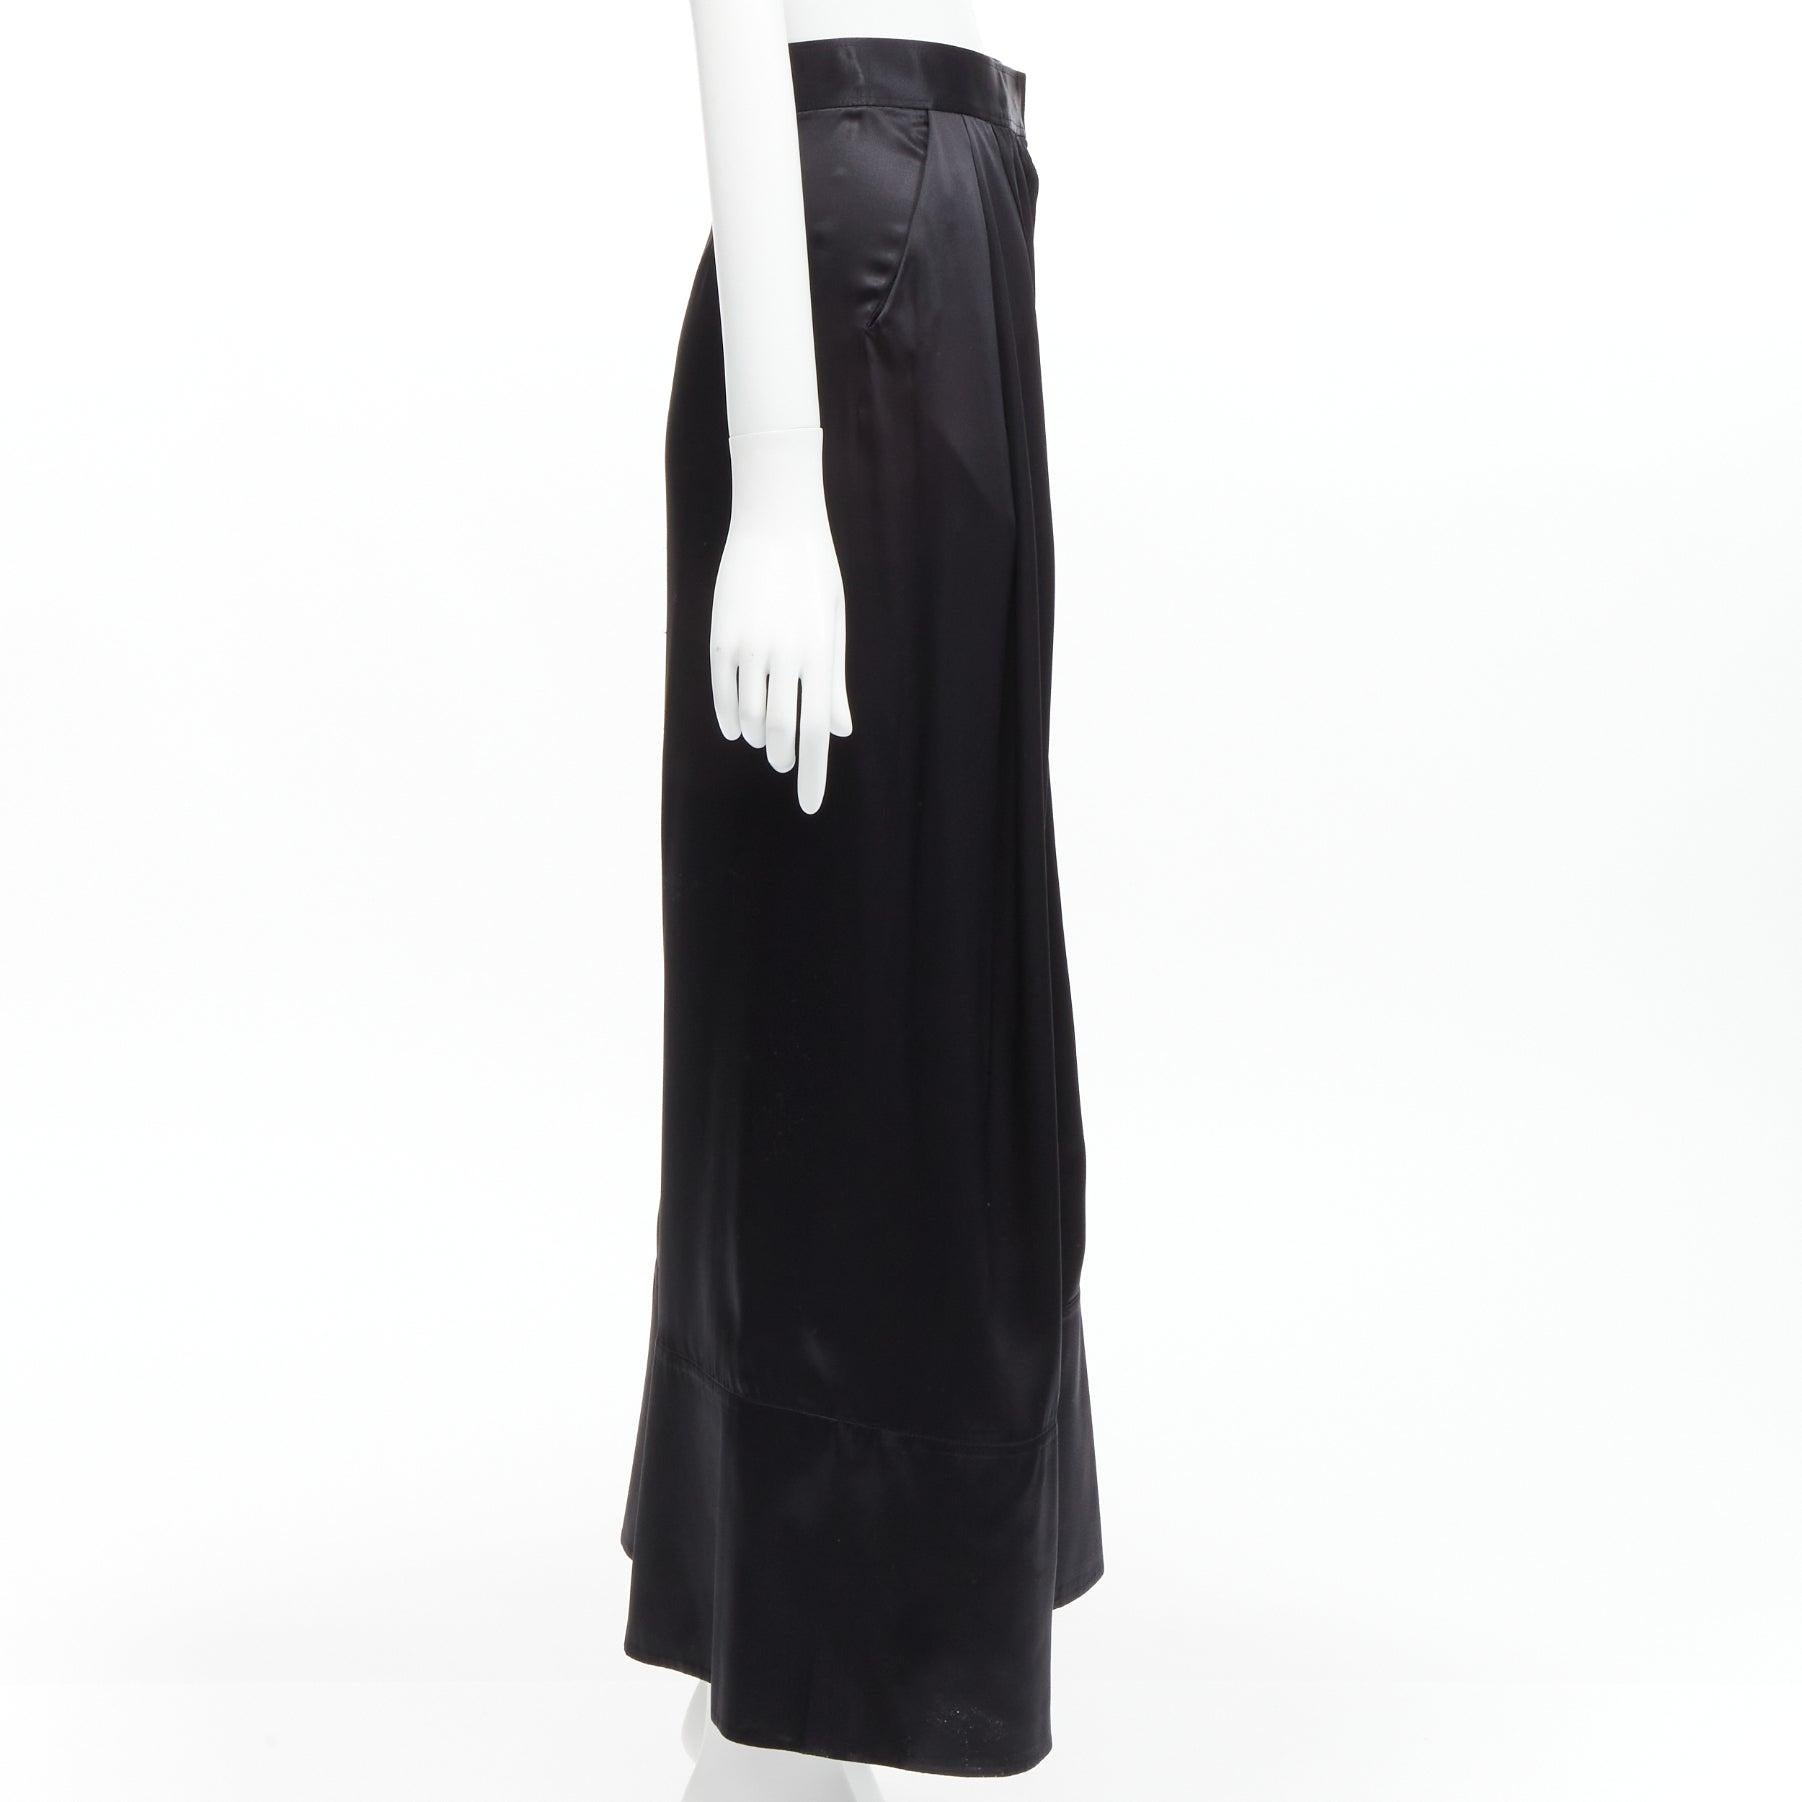 GIVENCHY RICCARDO TISCI black 100% silk satin high waisted wide leg pants In Excellent Condition For Sale In Hong Kong, NT